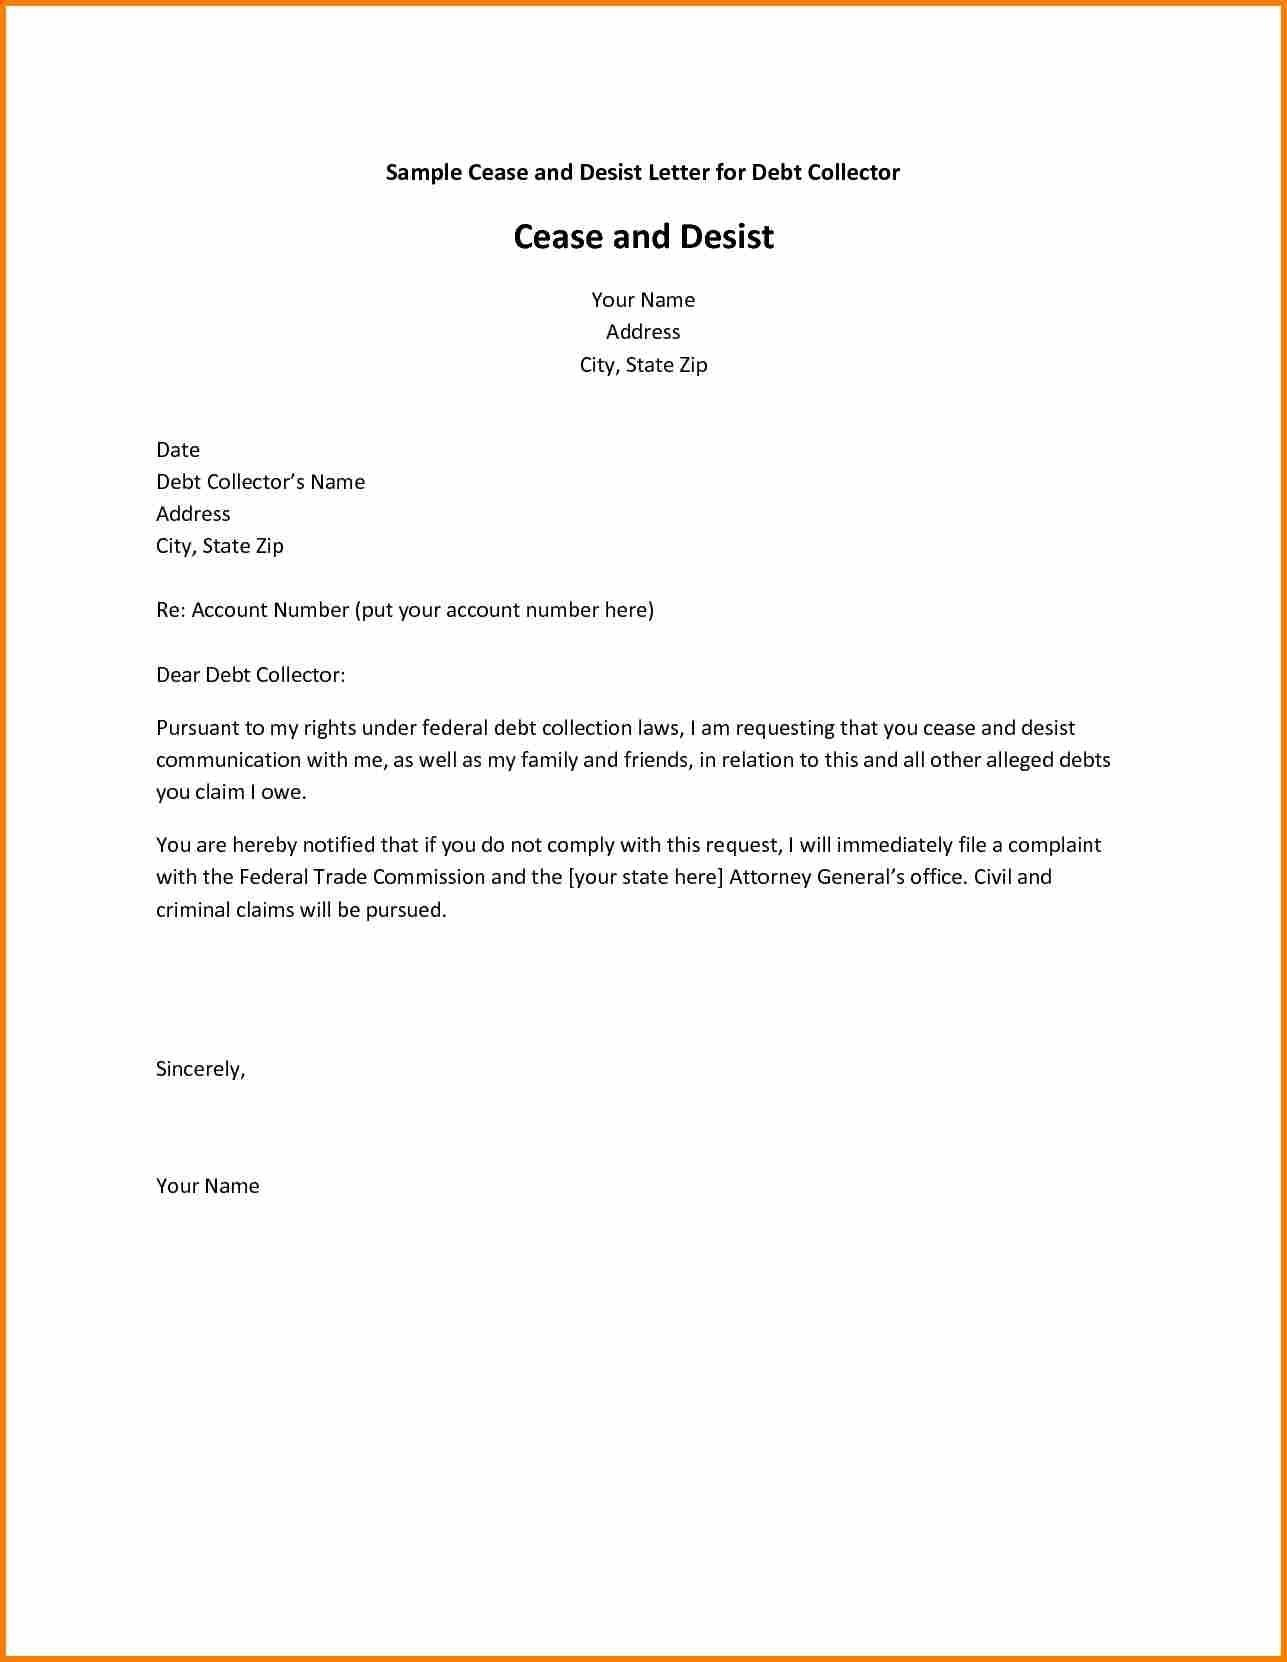 cease and desist letter template for debt collectors example-Debt Collection Cease and Desist Letter Template Copy Jury Duty Excuse Letter Refrence Cease and Desist 11-p